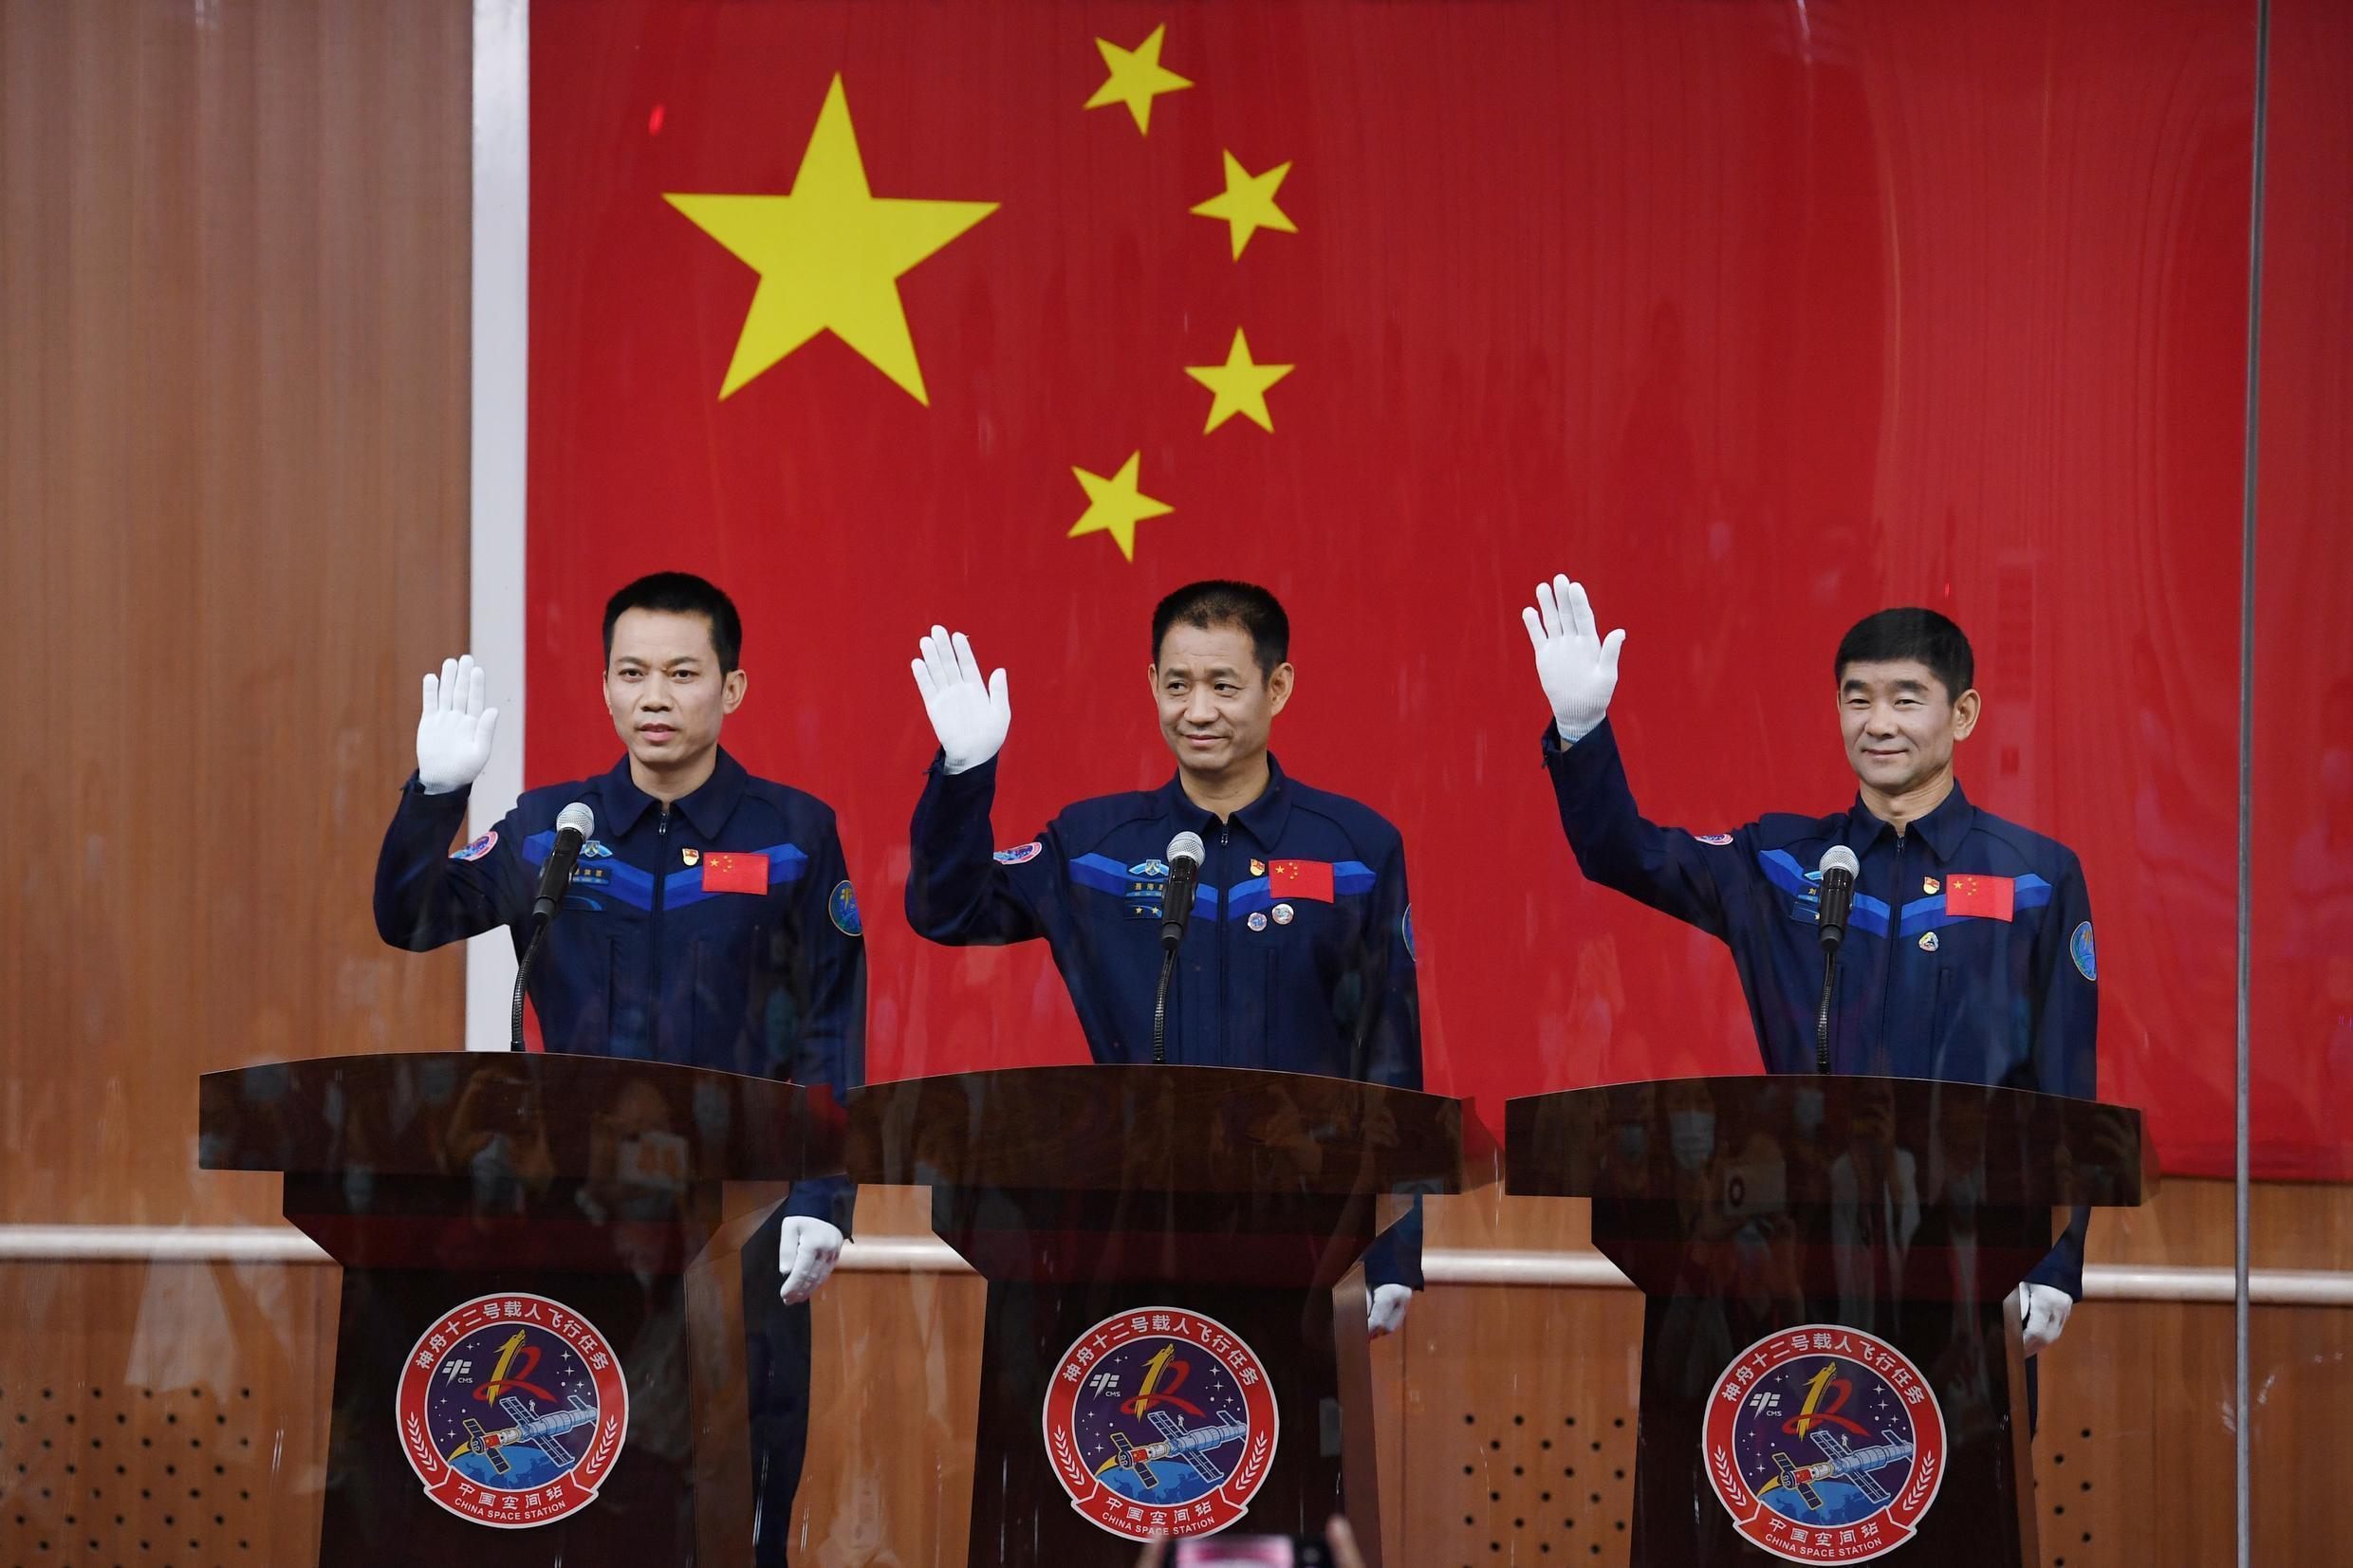 Astronauts Nie Haisheng (d), Liu Boming (d), and Tang Hongbo are photographed shortly before the launch of the spacecraft. 